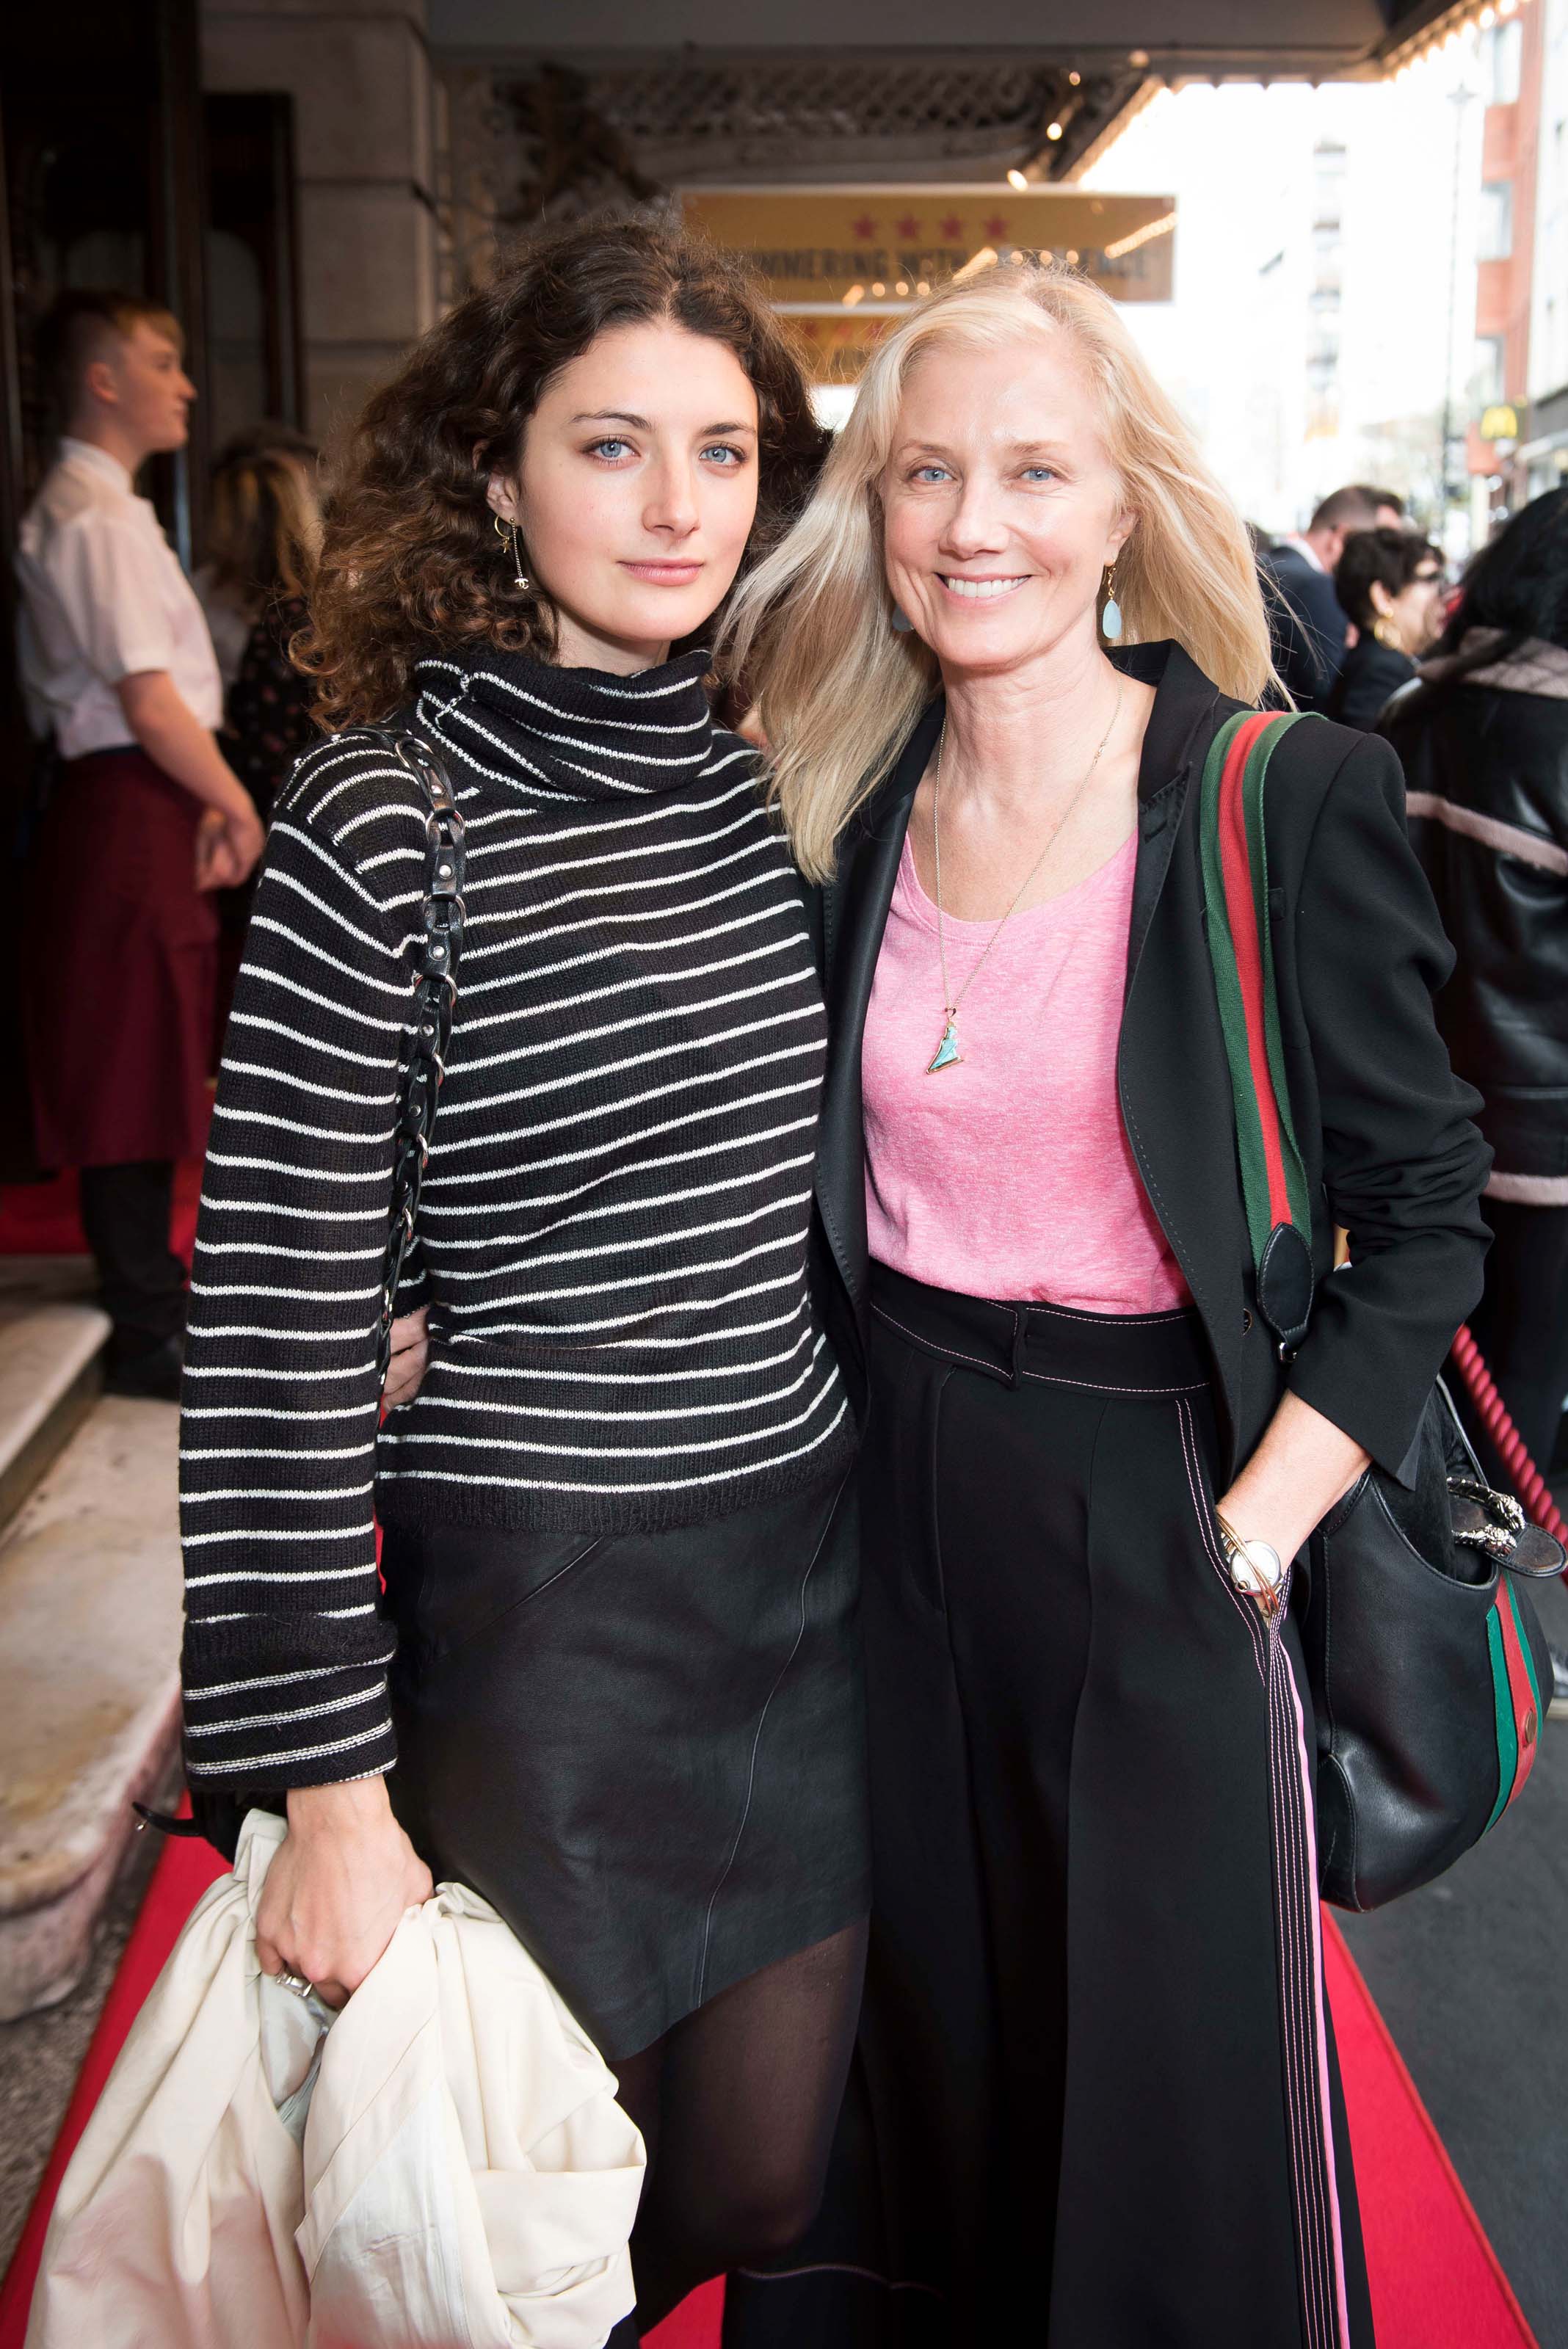 Daisy Bevan attends The Inheritance press day